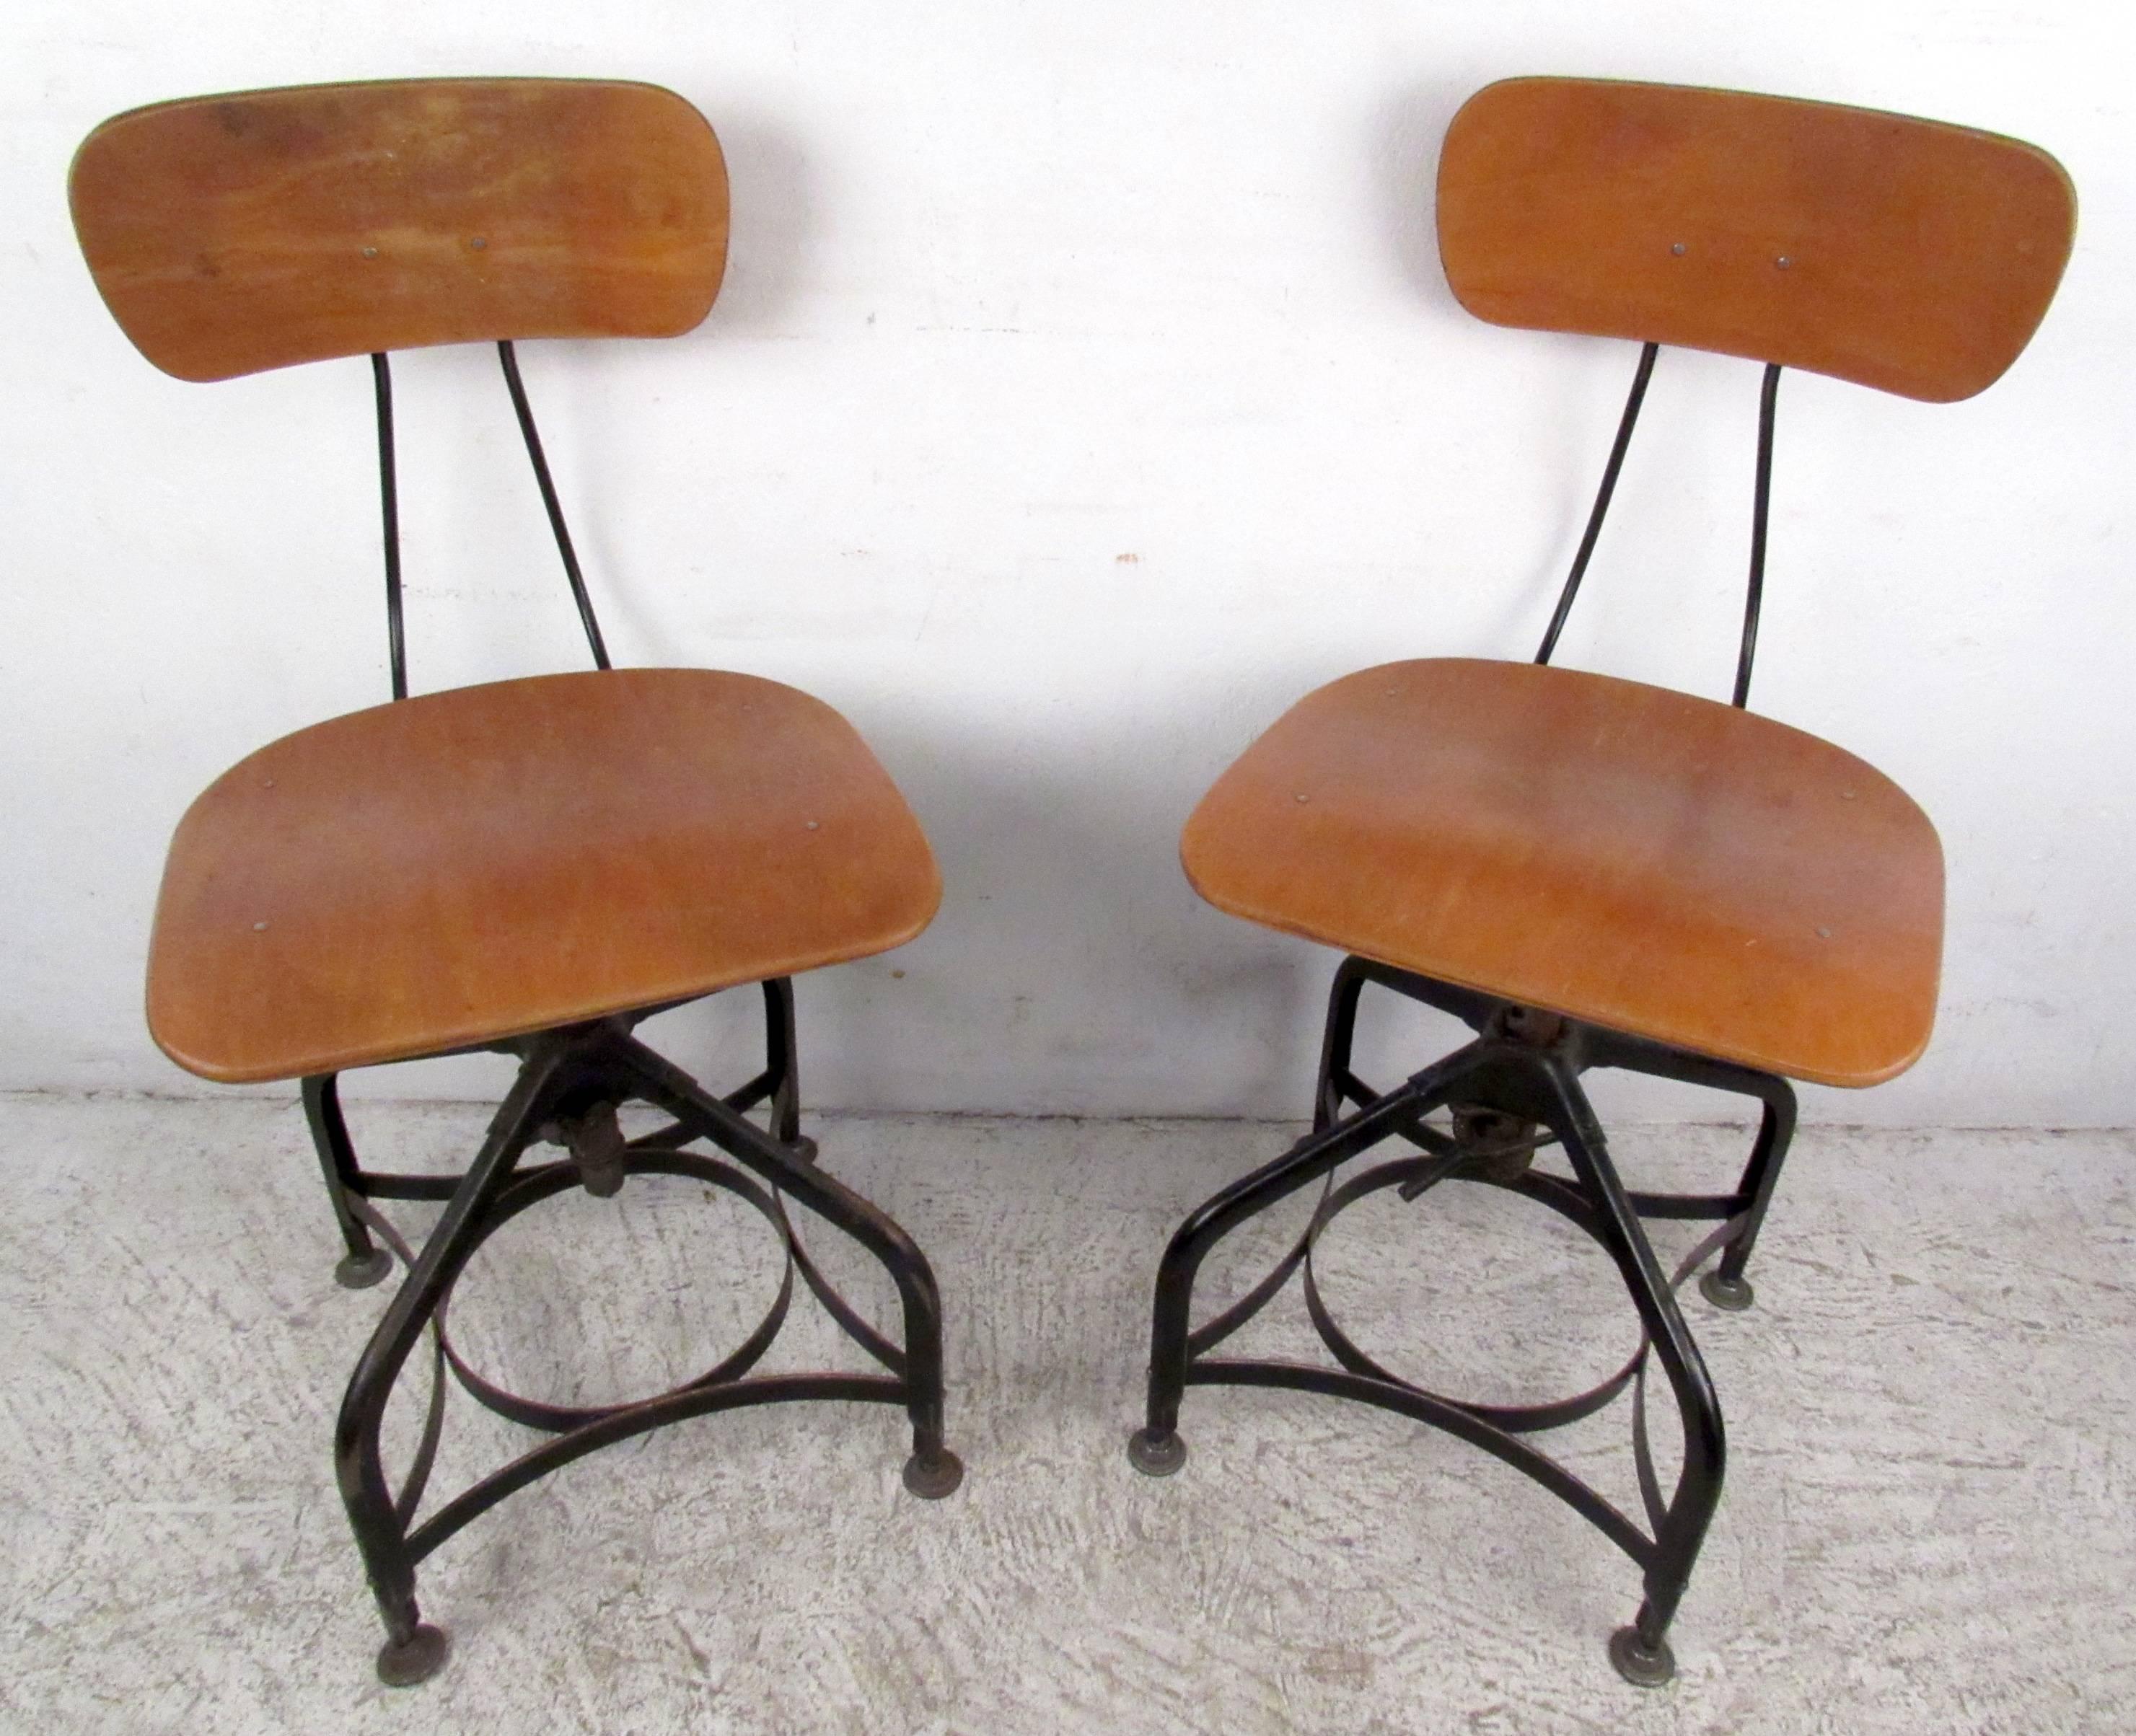 Two vintage modern industrial draftsman stools by Toledo, features bent wood seat and back with adjustable iron bases.

Height adjustment seat: 16.25 - 31 - back - 20.75 - 35.5.

Please confirm item location NY or NJ with dealer.